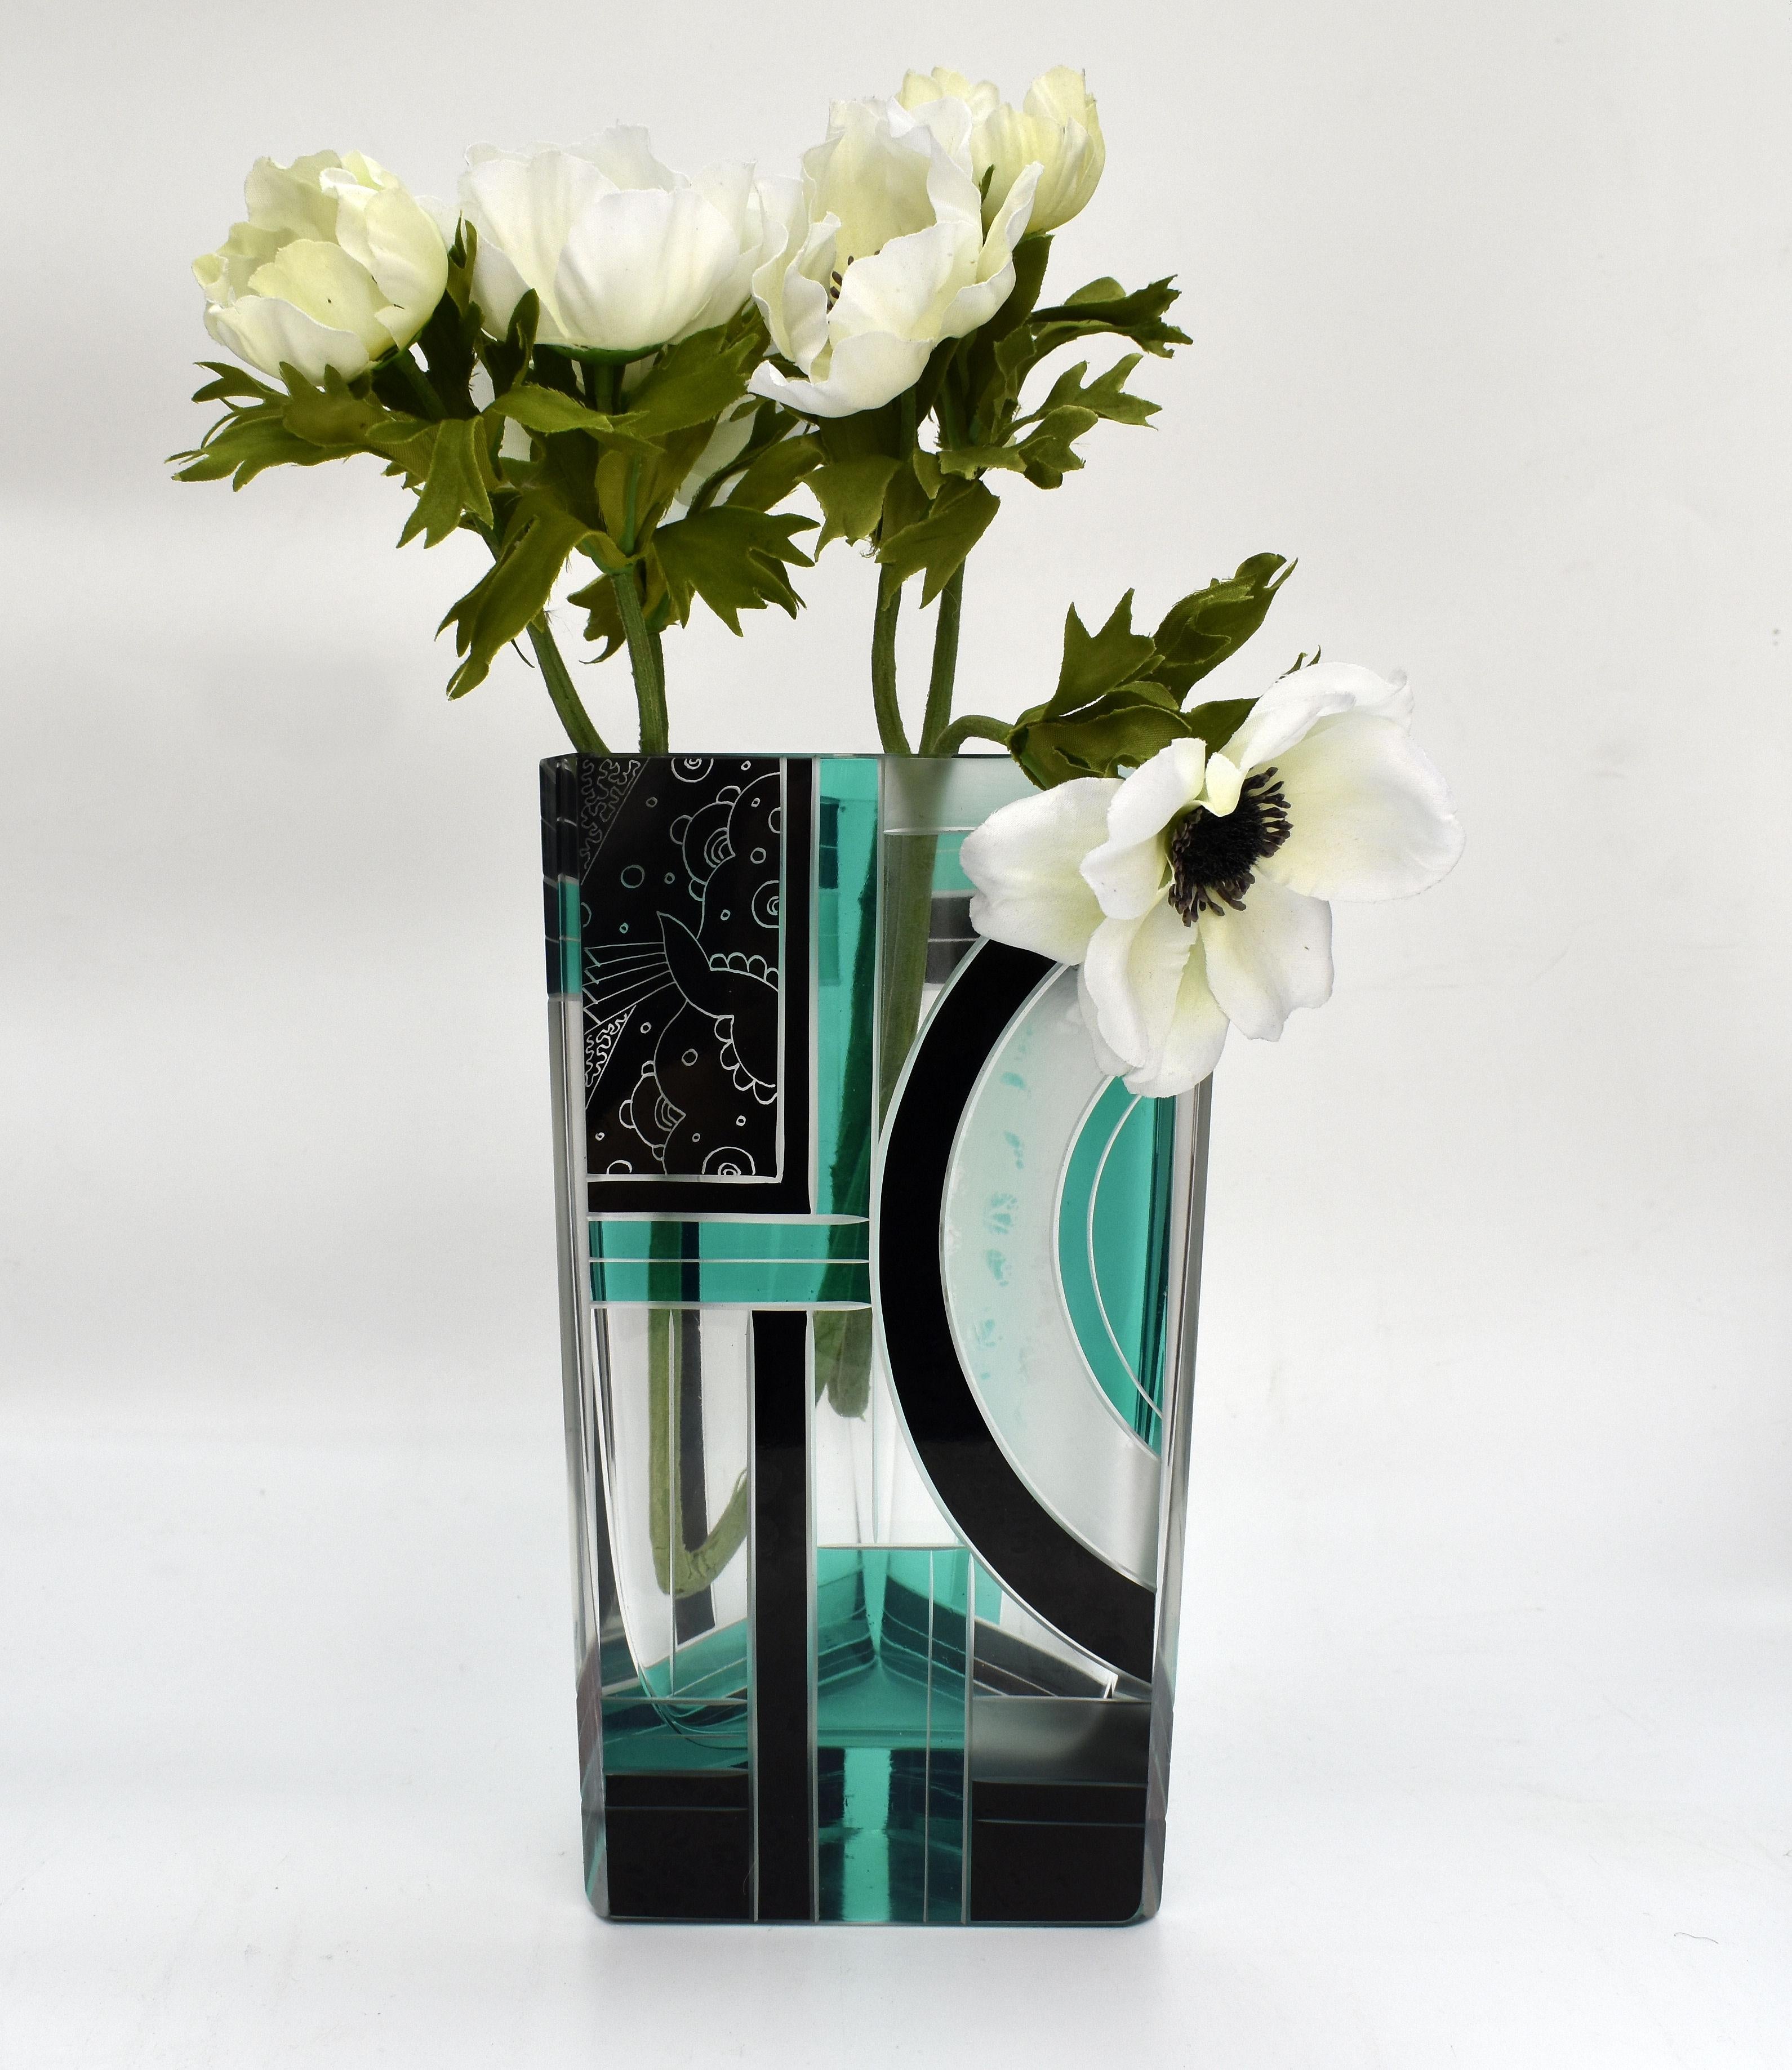 Originating from Czech republic this Art Deco vase not only visually looks stunning with it's very distinctive colourway and patterning but is a great size standing approximately 24 cm. The glass is extremely thick and therefore the vase itself is